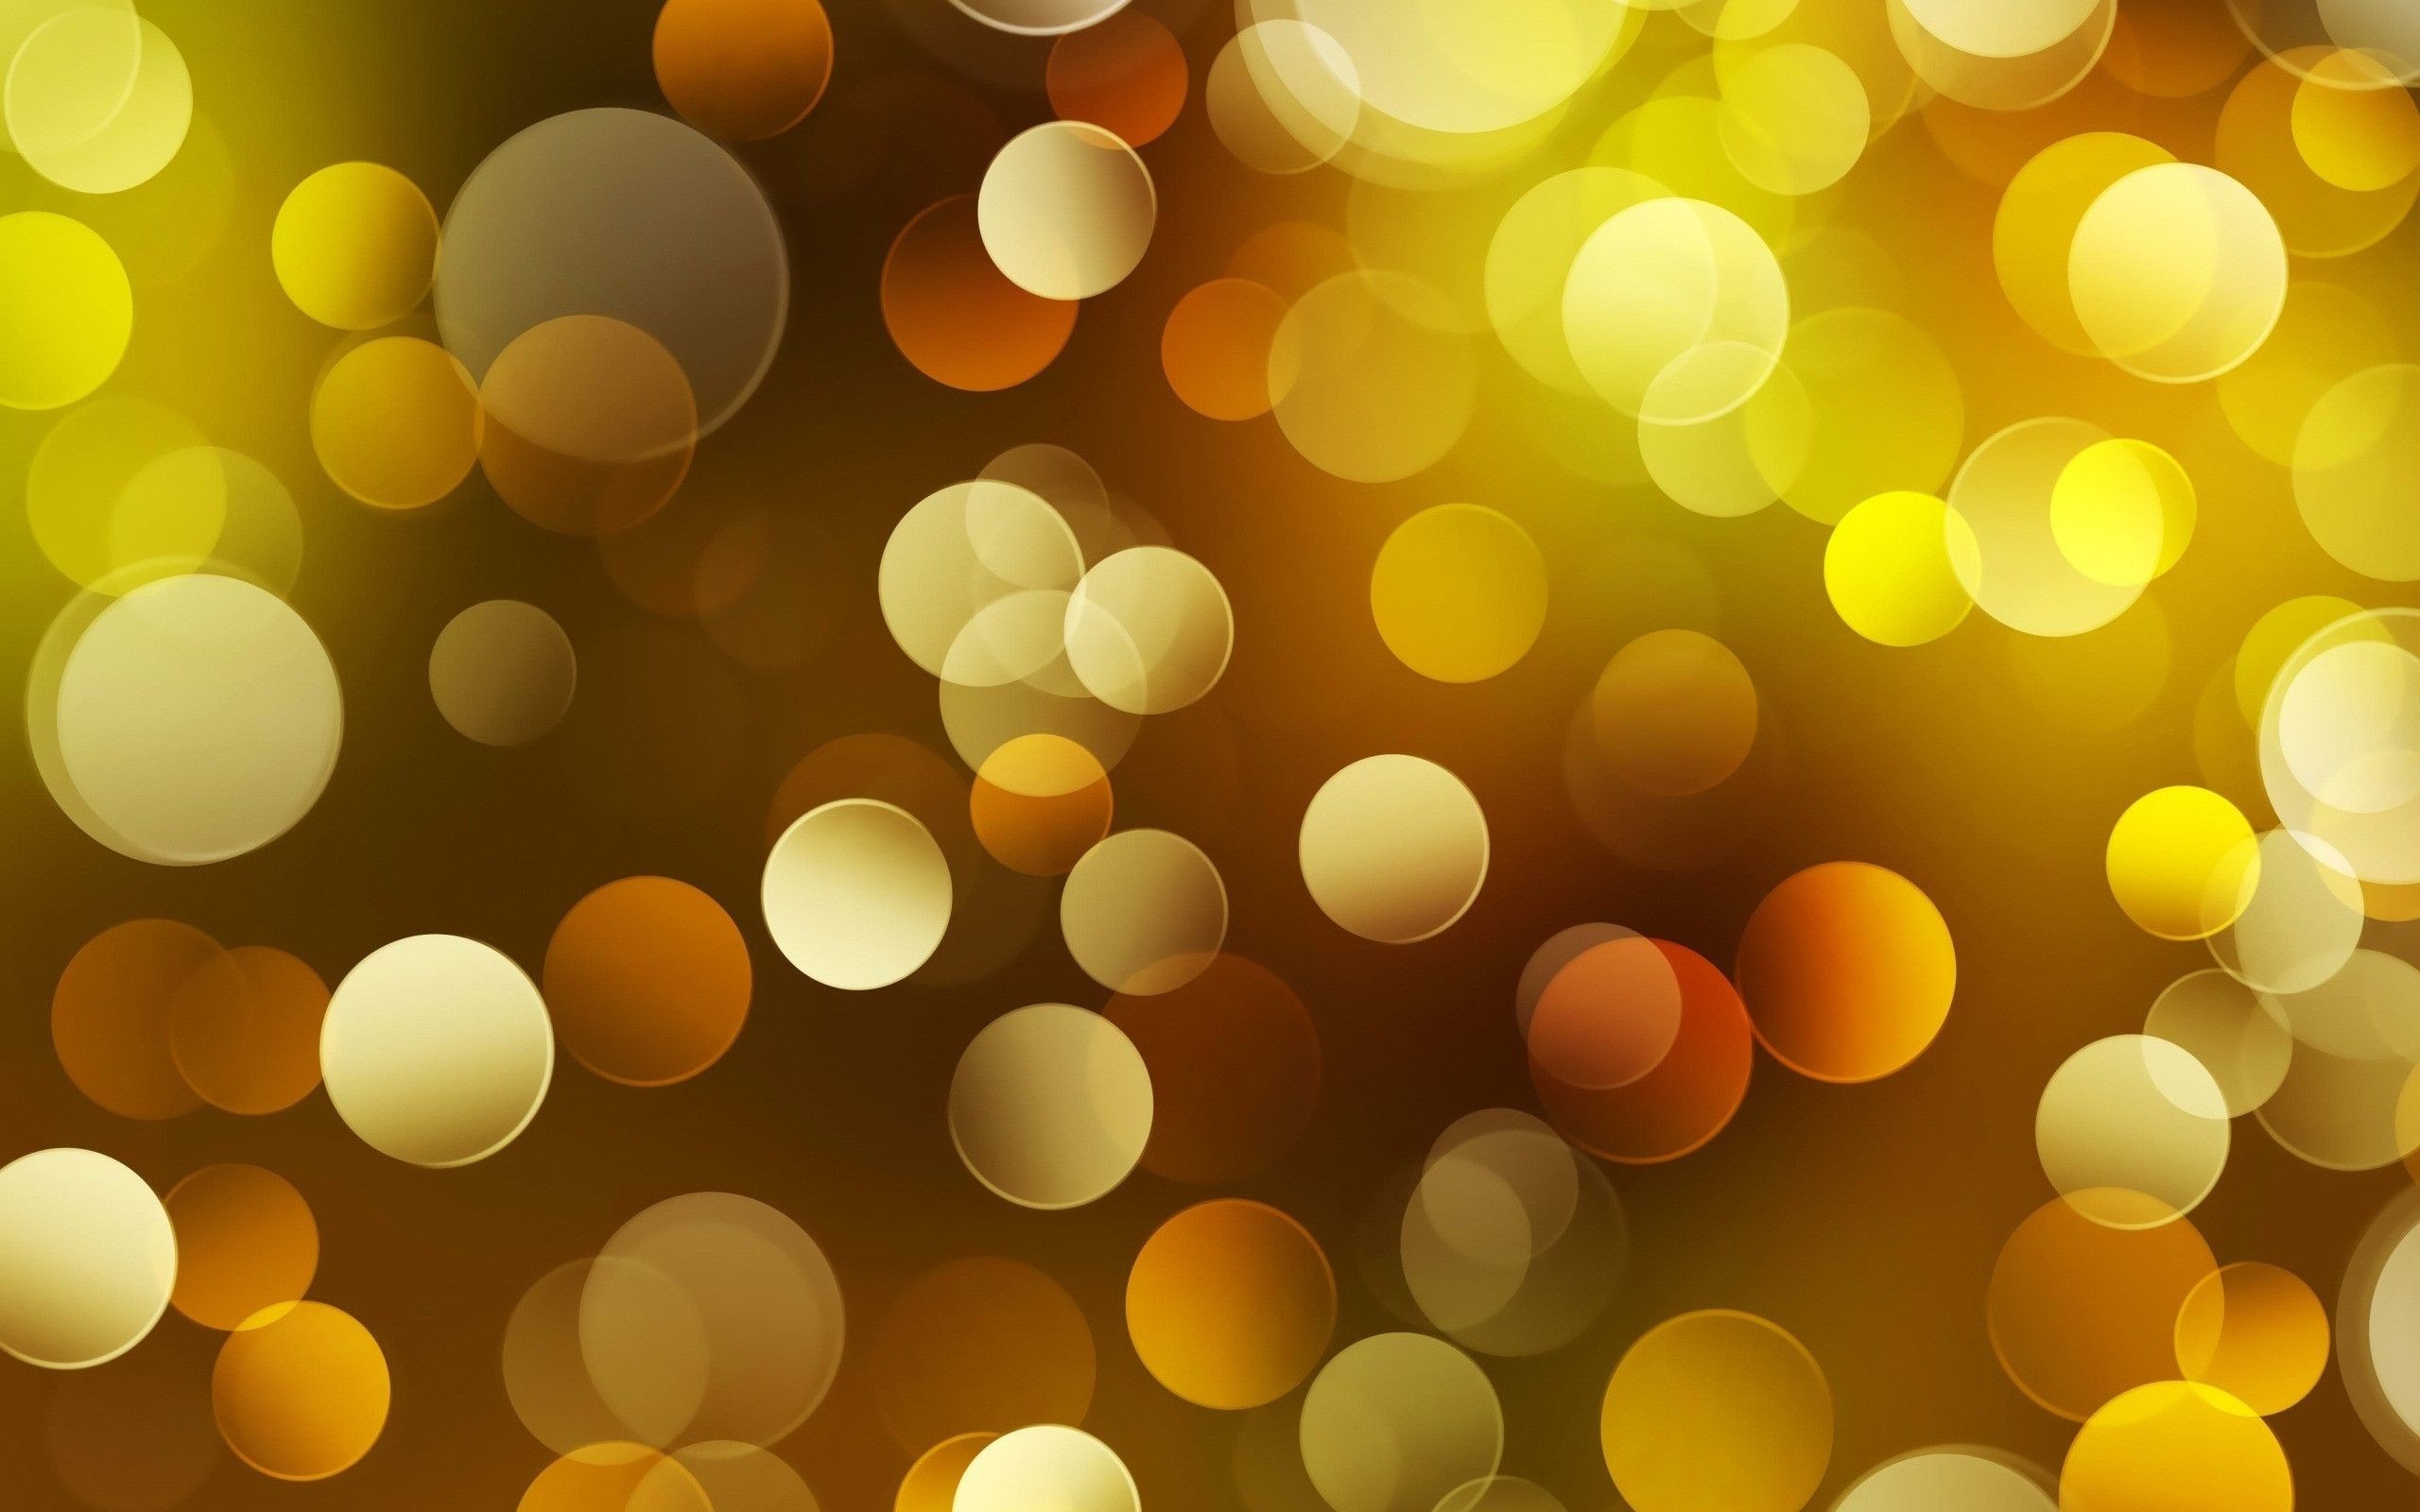 Wallpaper For Macbook Air 13, Adorable Hdq Backgrounds - Light Gold Bubble Background - HD Wallpaper 